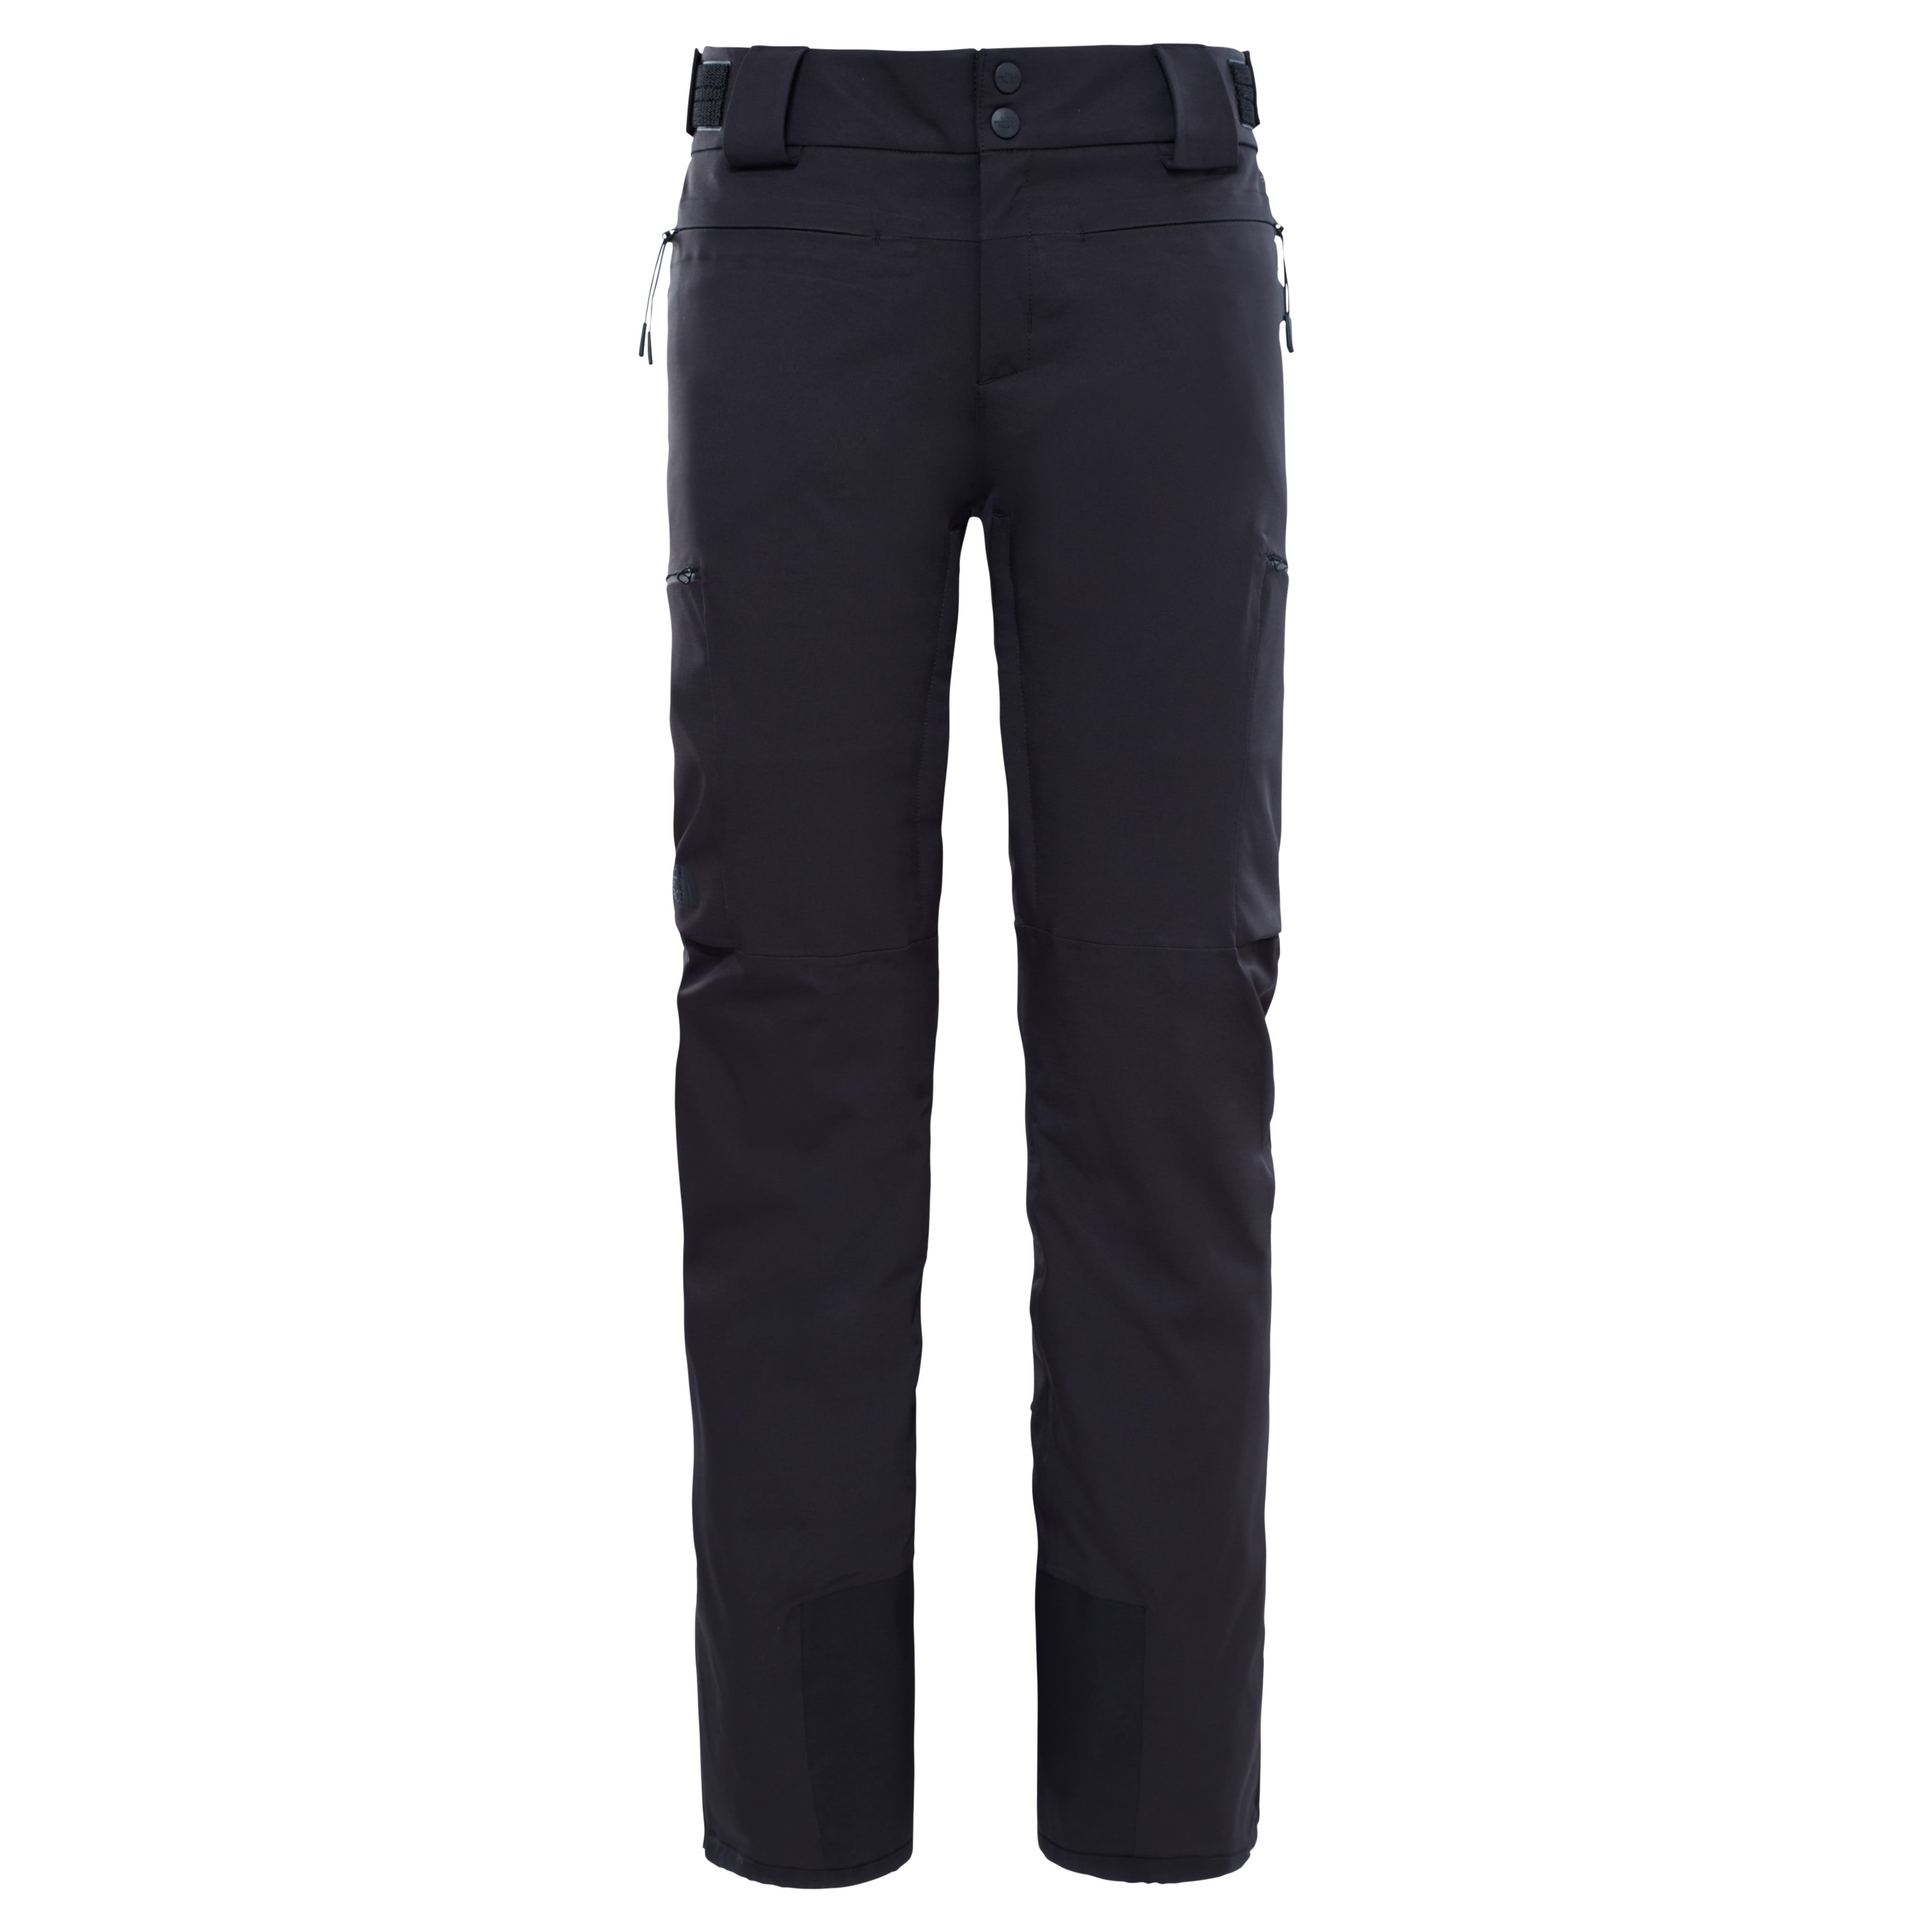 Buy The North Face W Powdance Pant from 